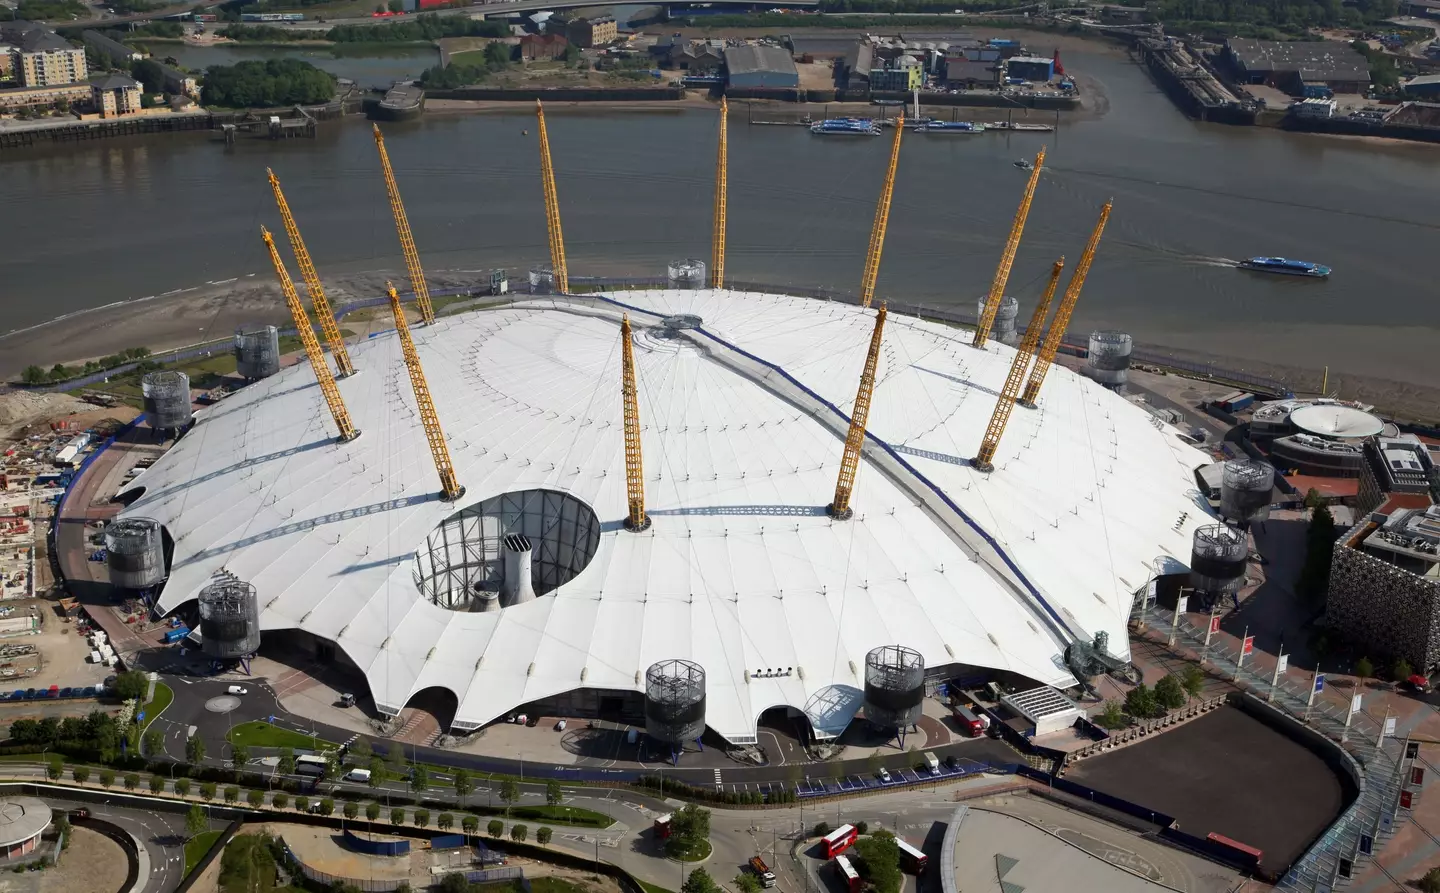 Peter Kay's residency at the O2 Arena begins next month.